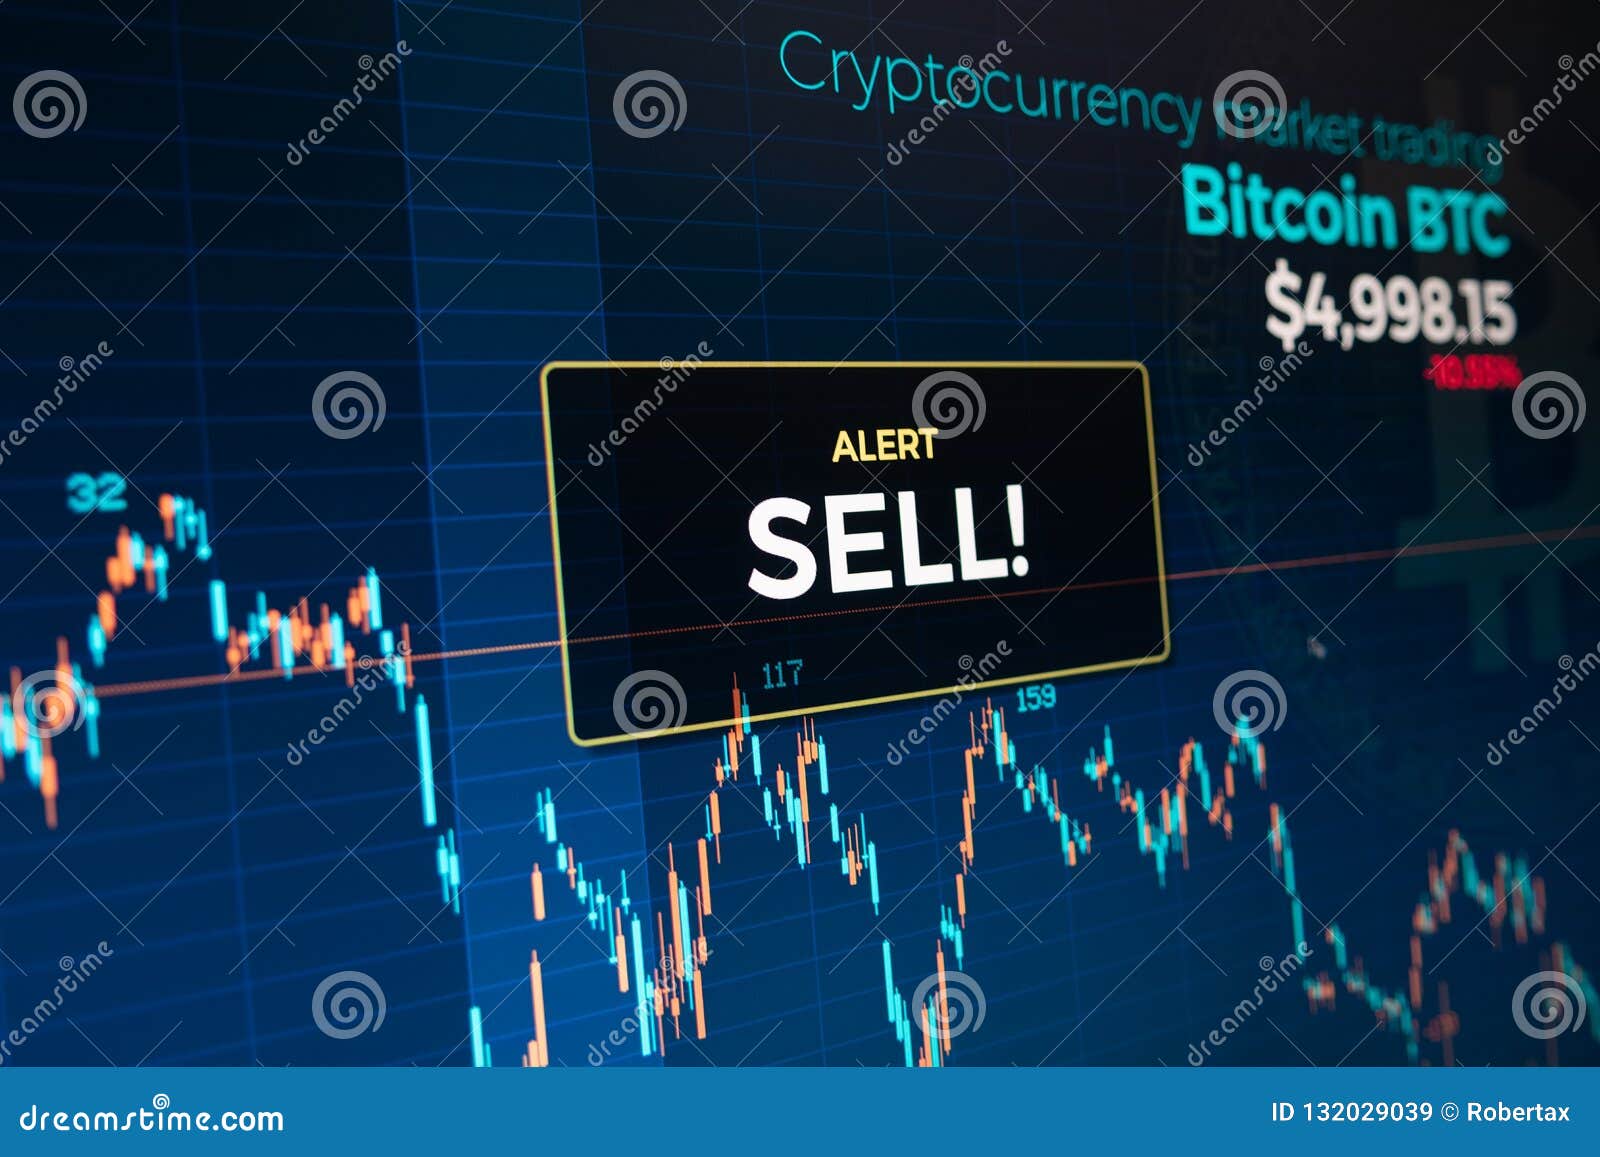 free stock alert cryptocurrency